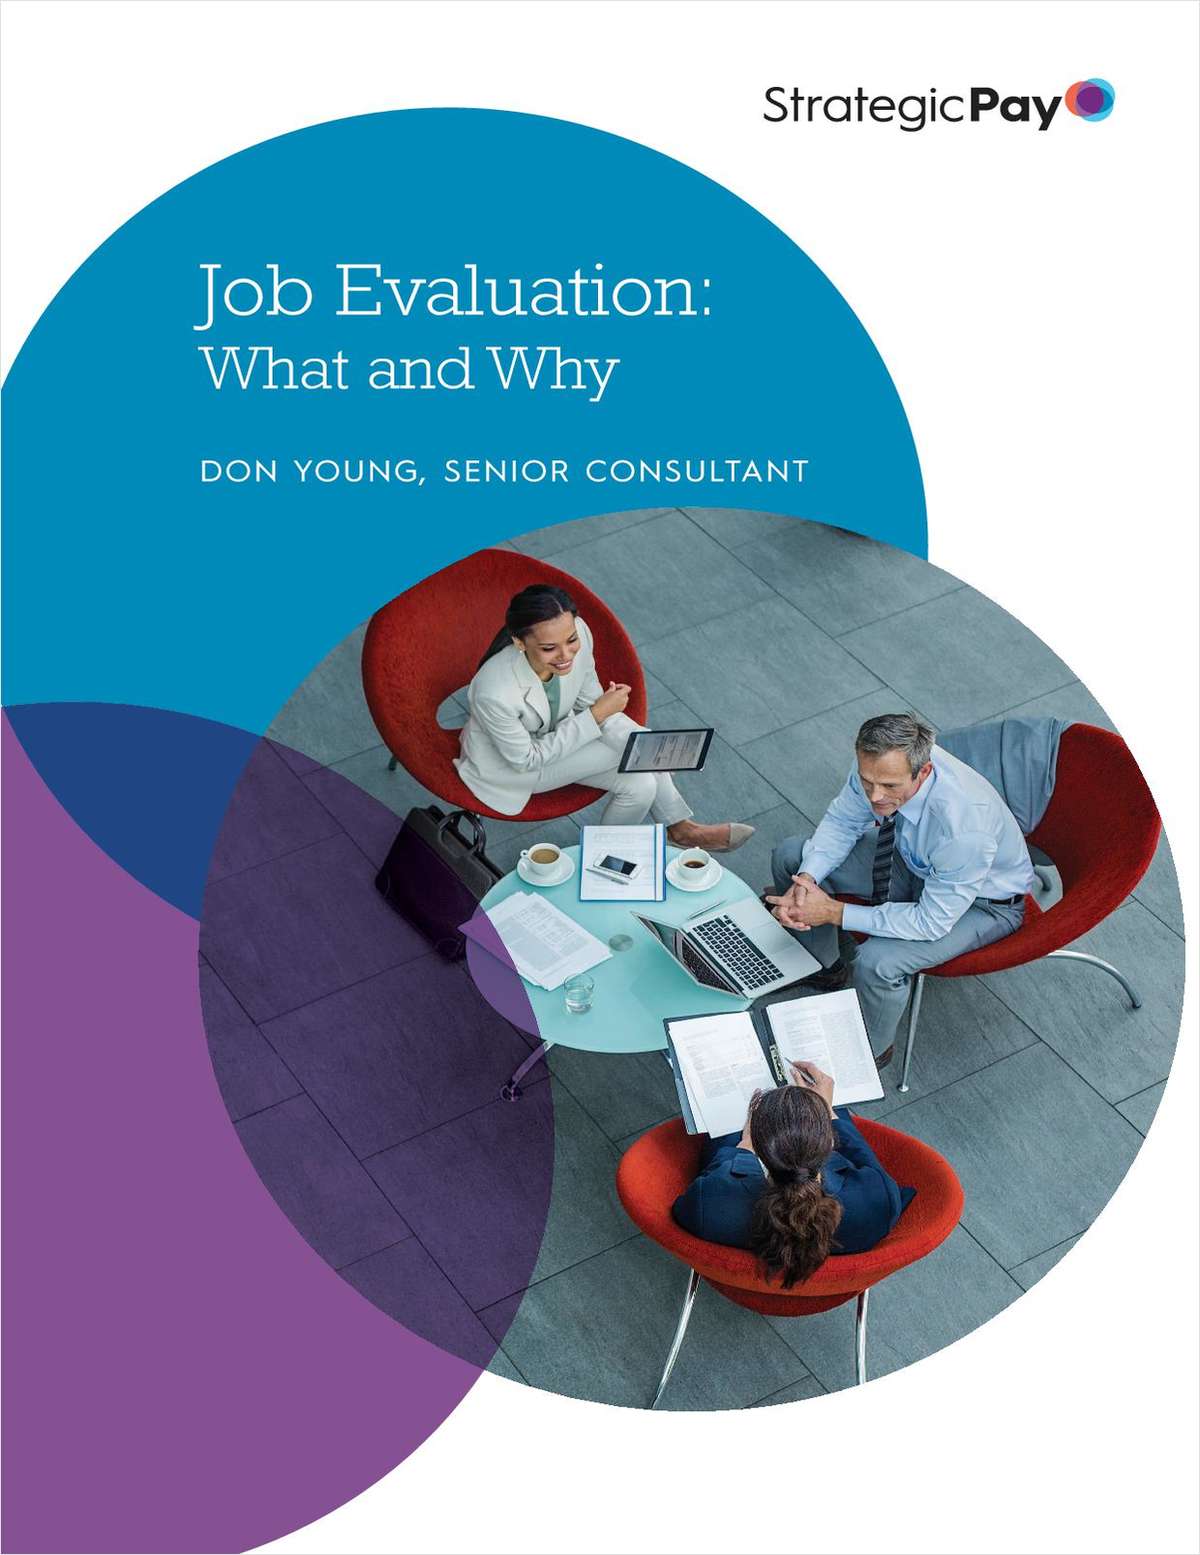 Why job evaluation is your company's business